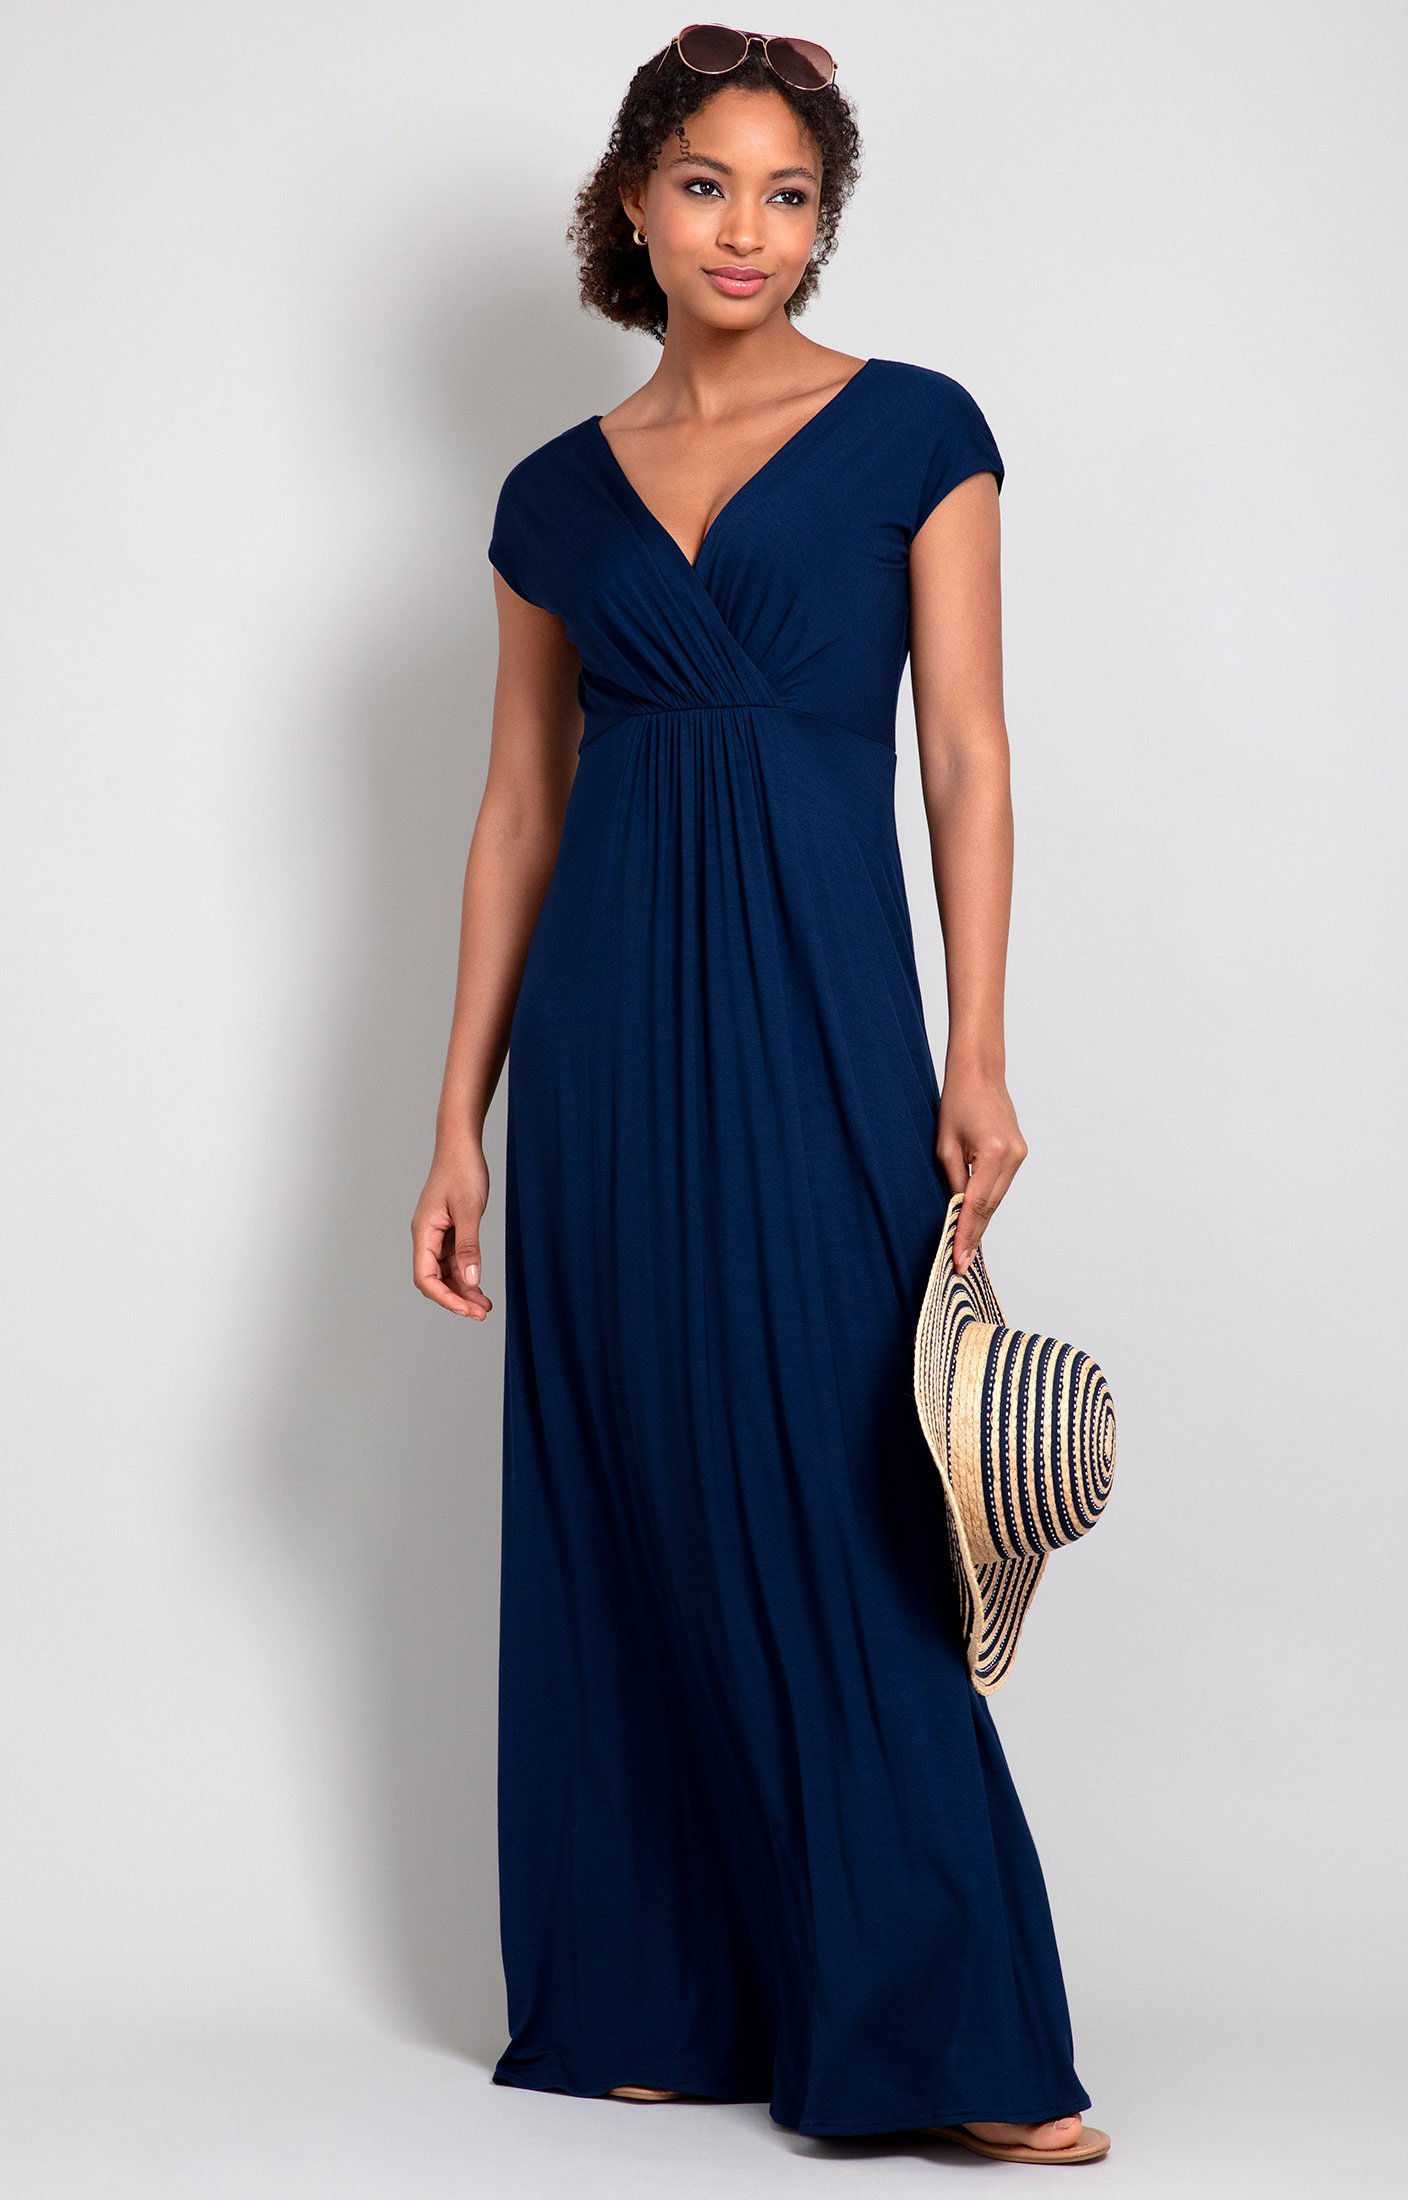 Alie and Wedding by - Evening Blue Sophia Navy Dresses, Wear Party Maxi Clothes Dress